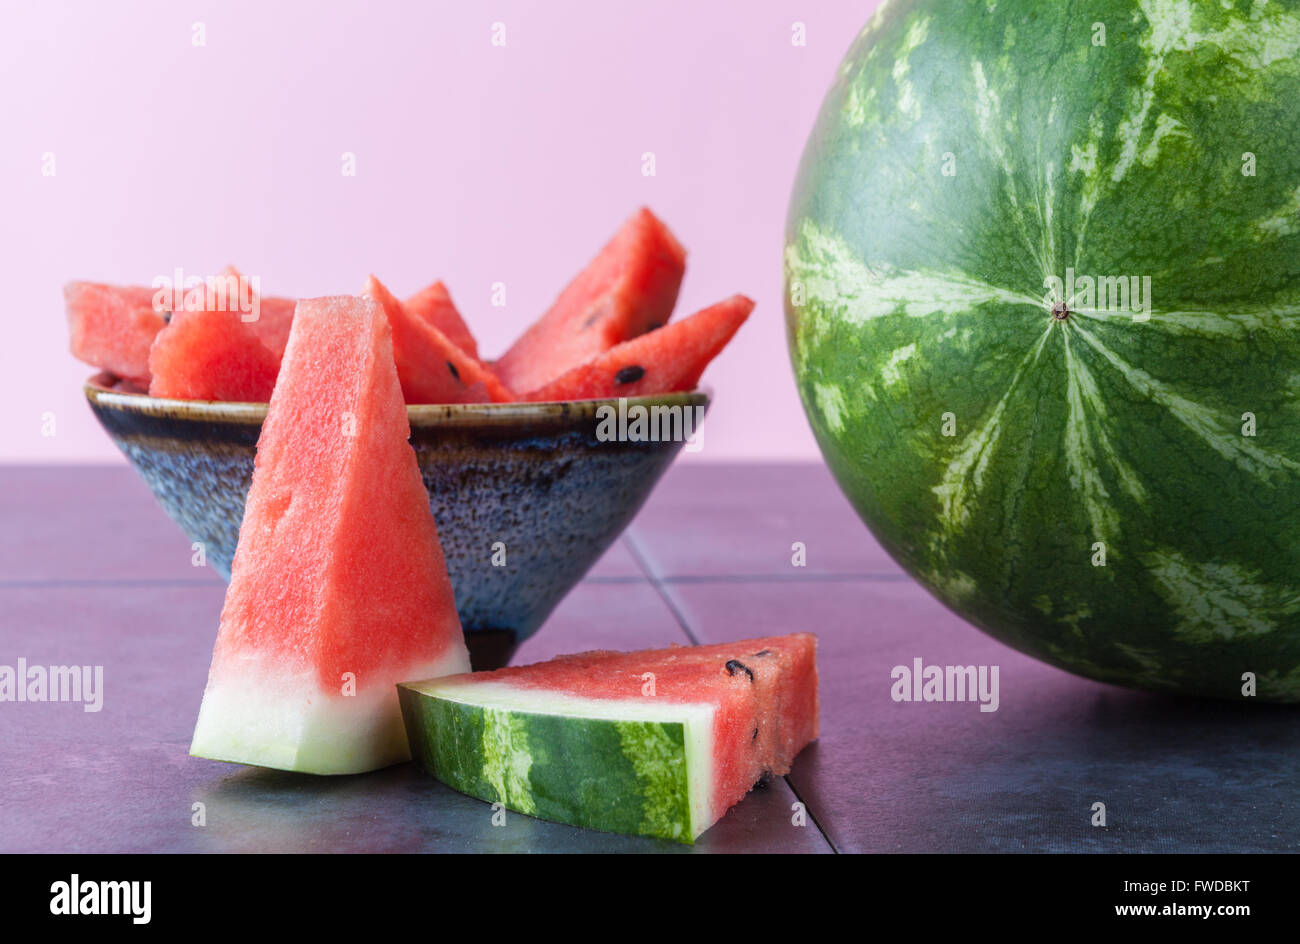 Whole watermelon and slices in ceramic bowl with copy space. Shallow depth of field. Stock Photo